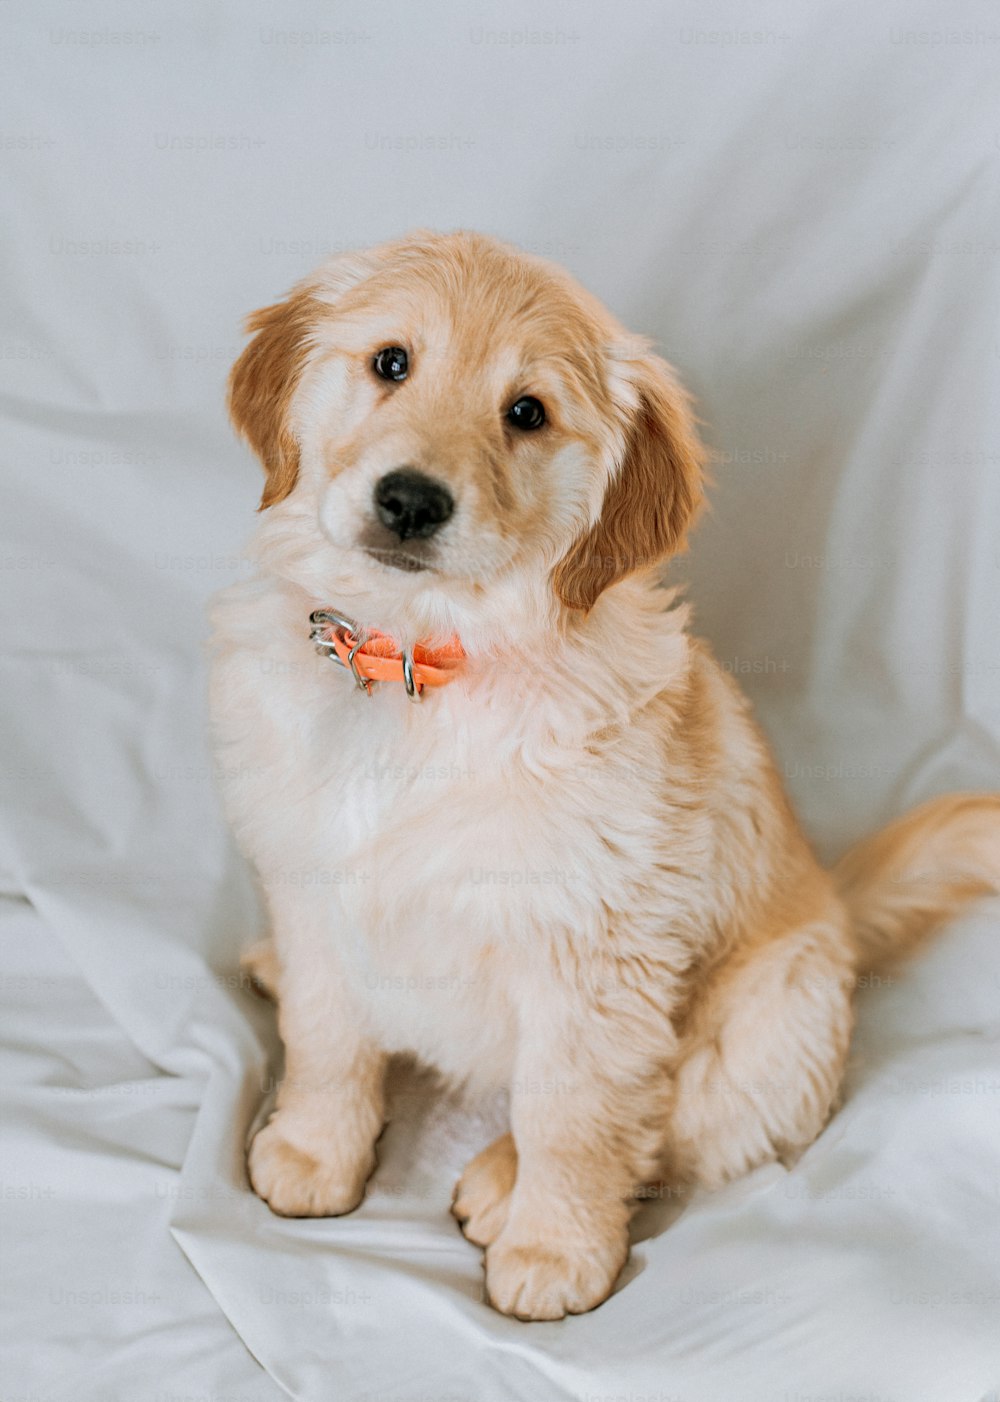 Golden Retriever Sitting In Front Of A White Background Stock Photo -  Download Image Now - iStock